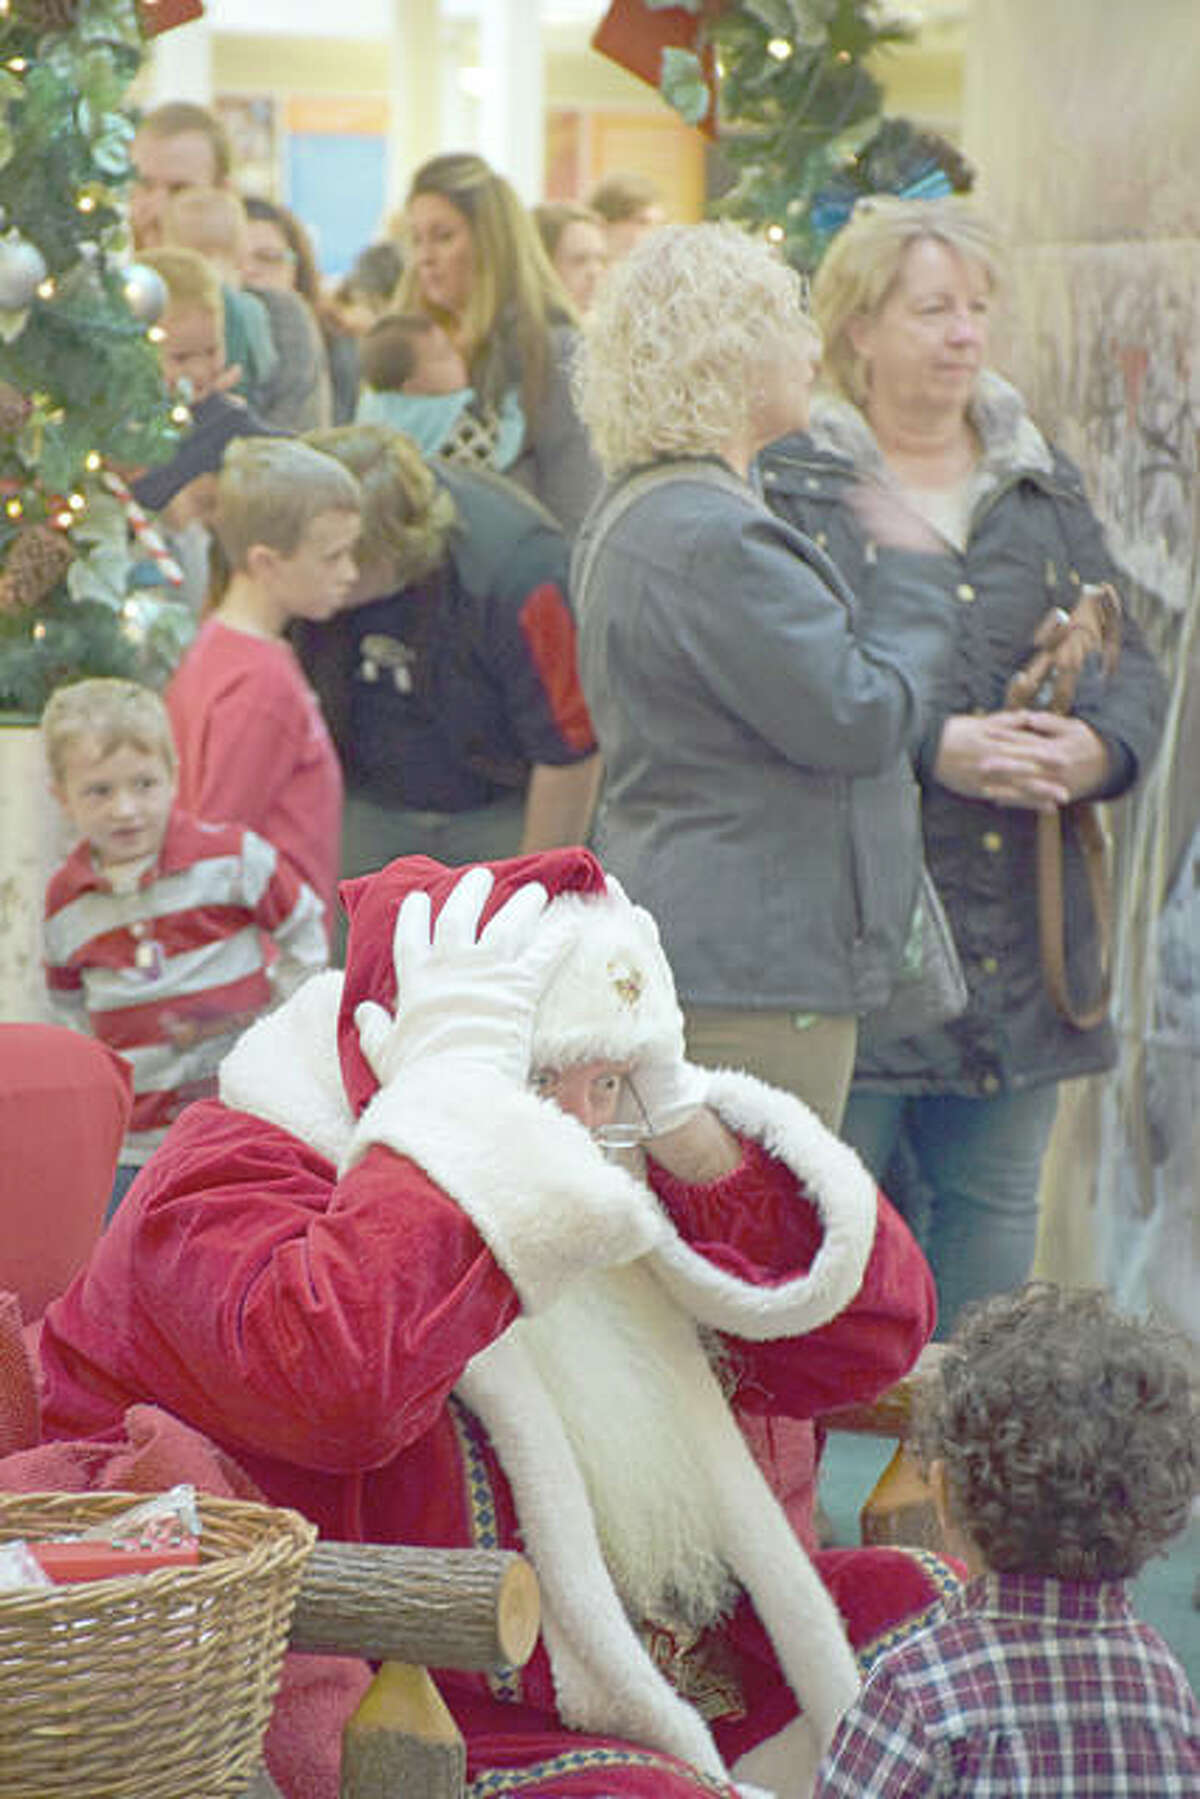 There was a long line to see Santa Claus on Saturday at the Alton Square Mall.